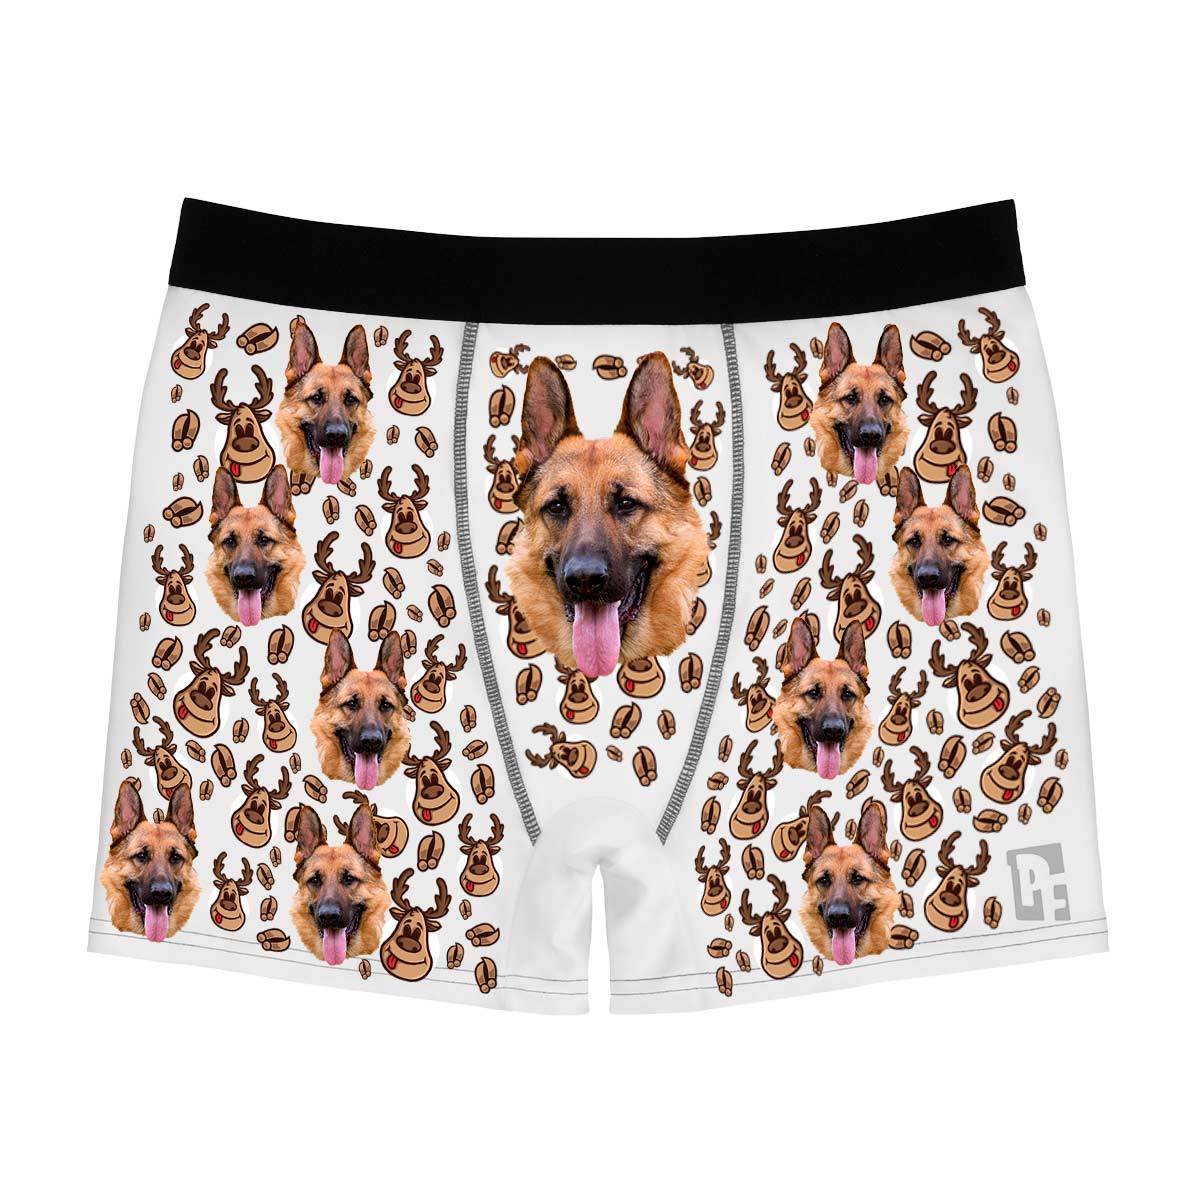 White Deer Hunter men's boxer briefs personalized with photo printed on them